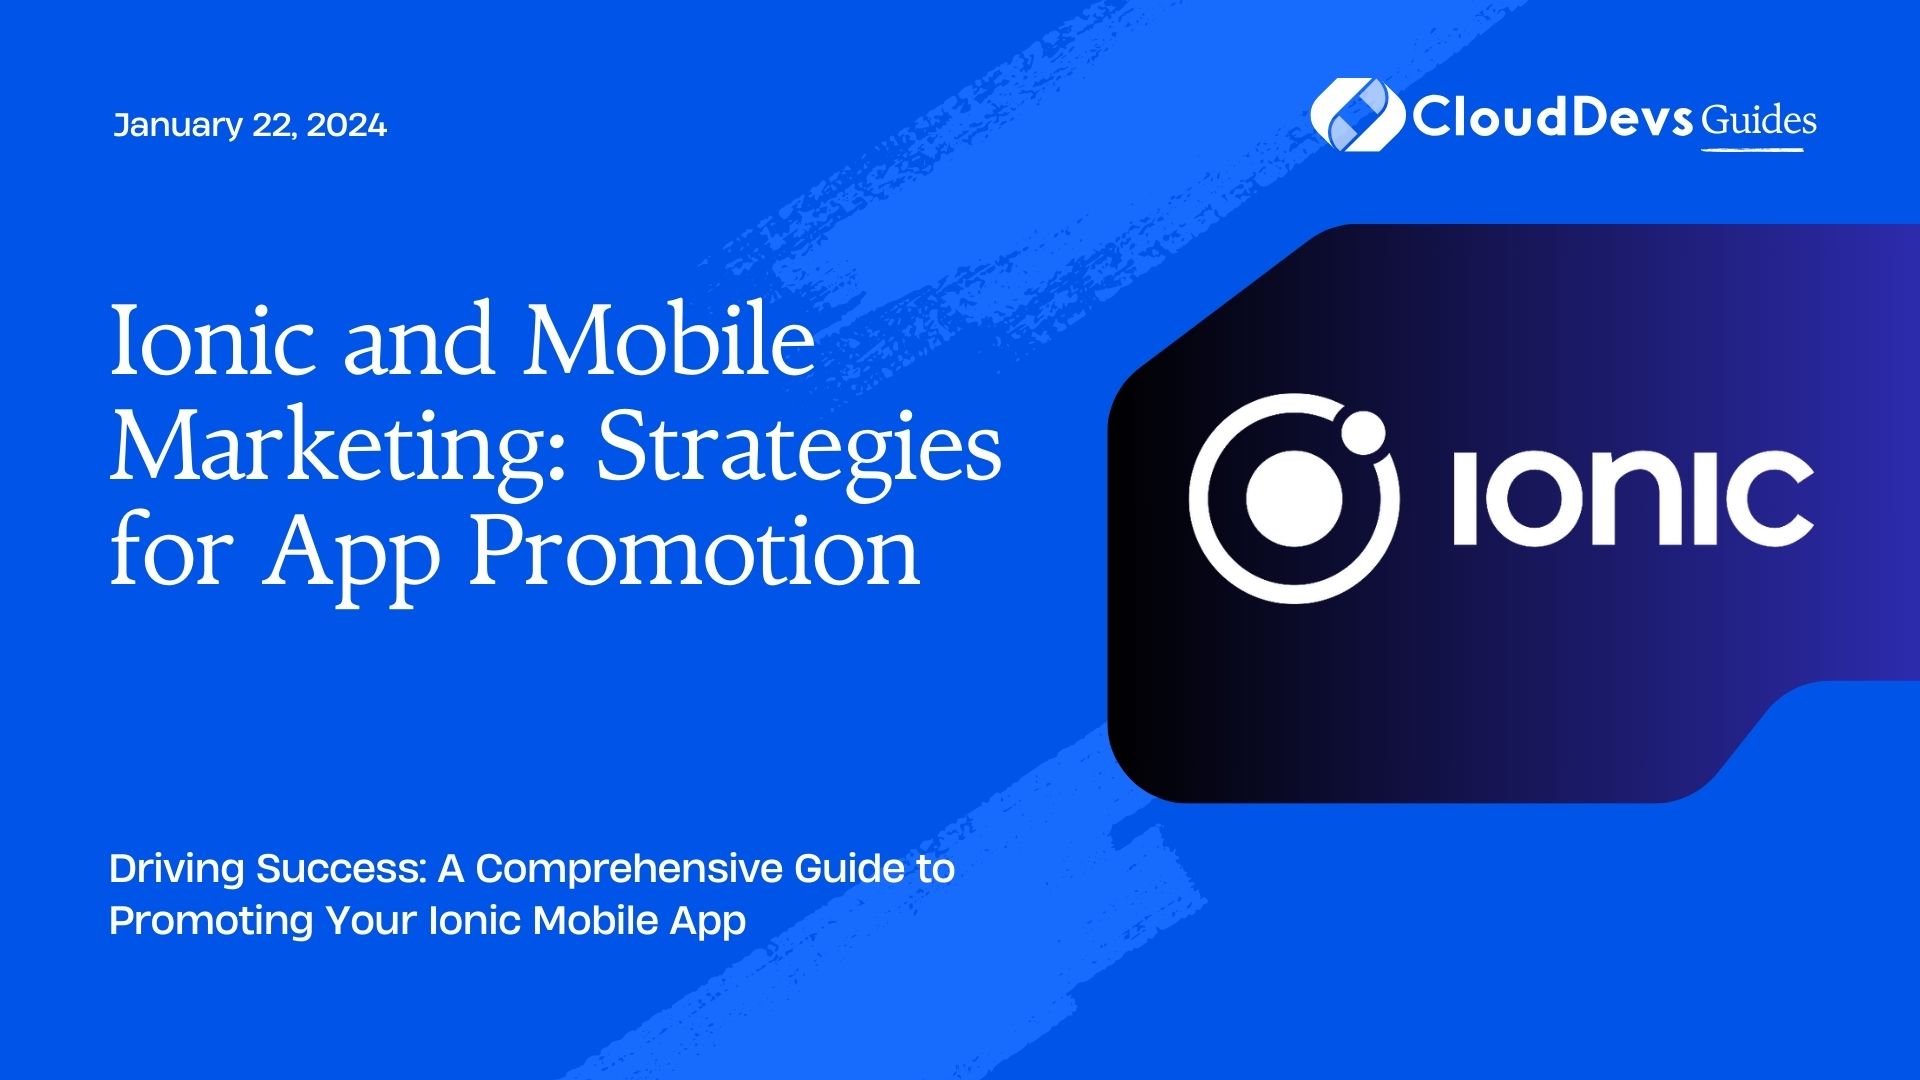 Ionic and Mobile Marketing: Strategies for App Promotion